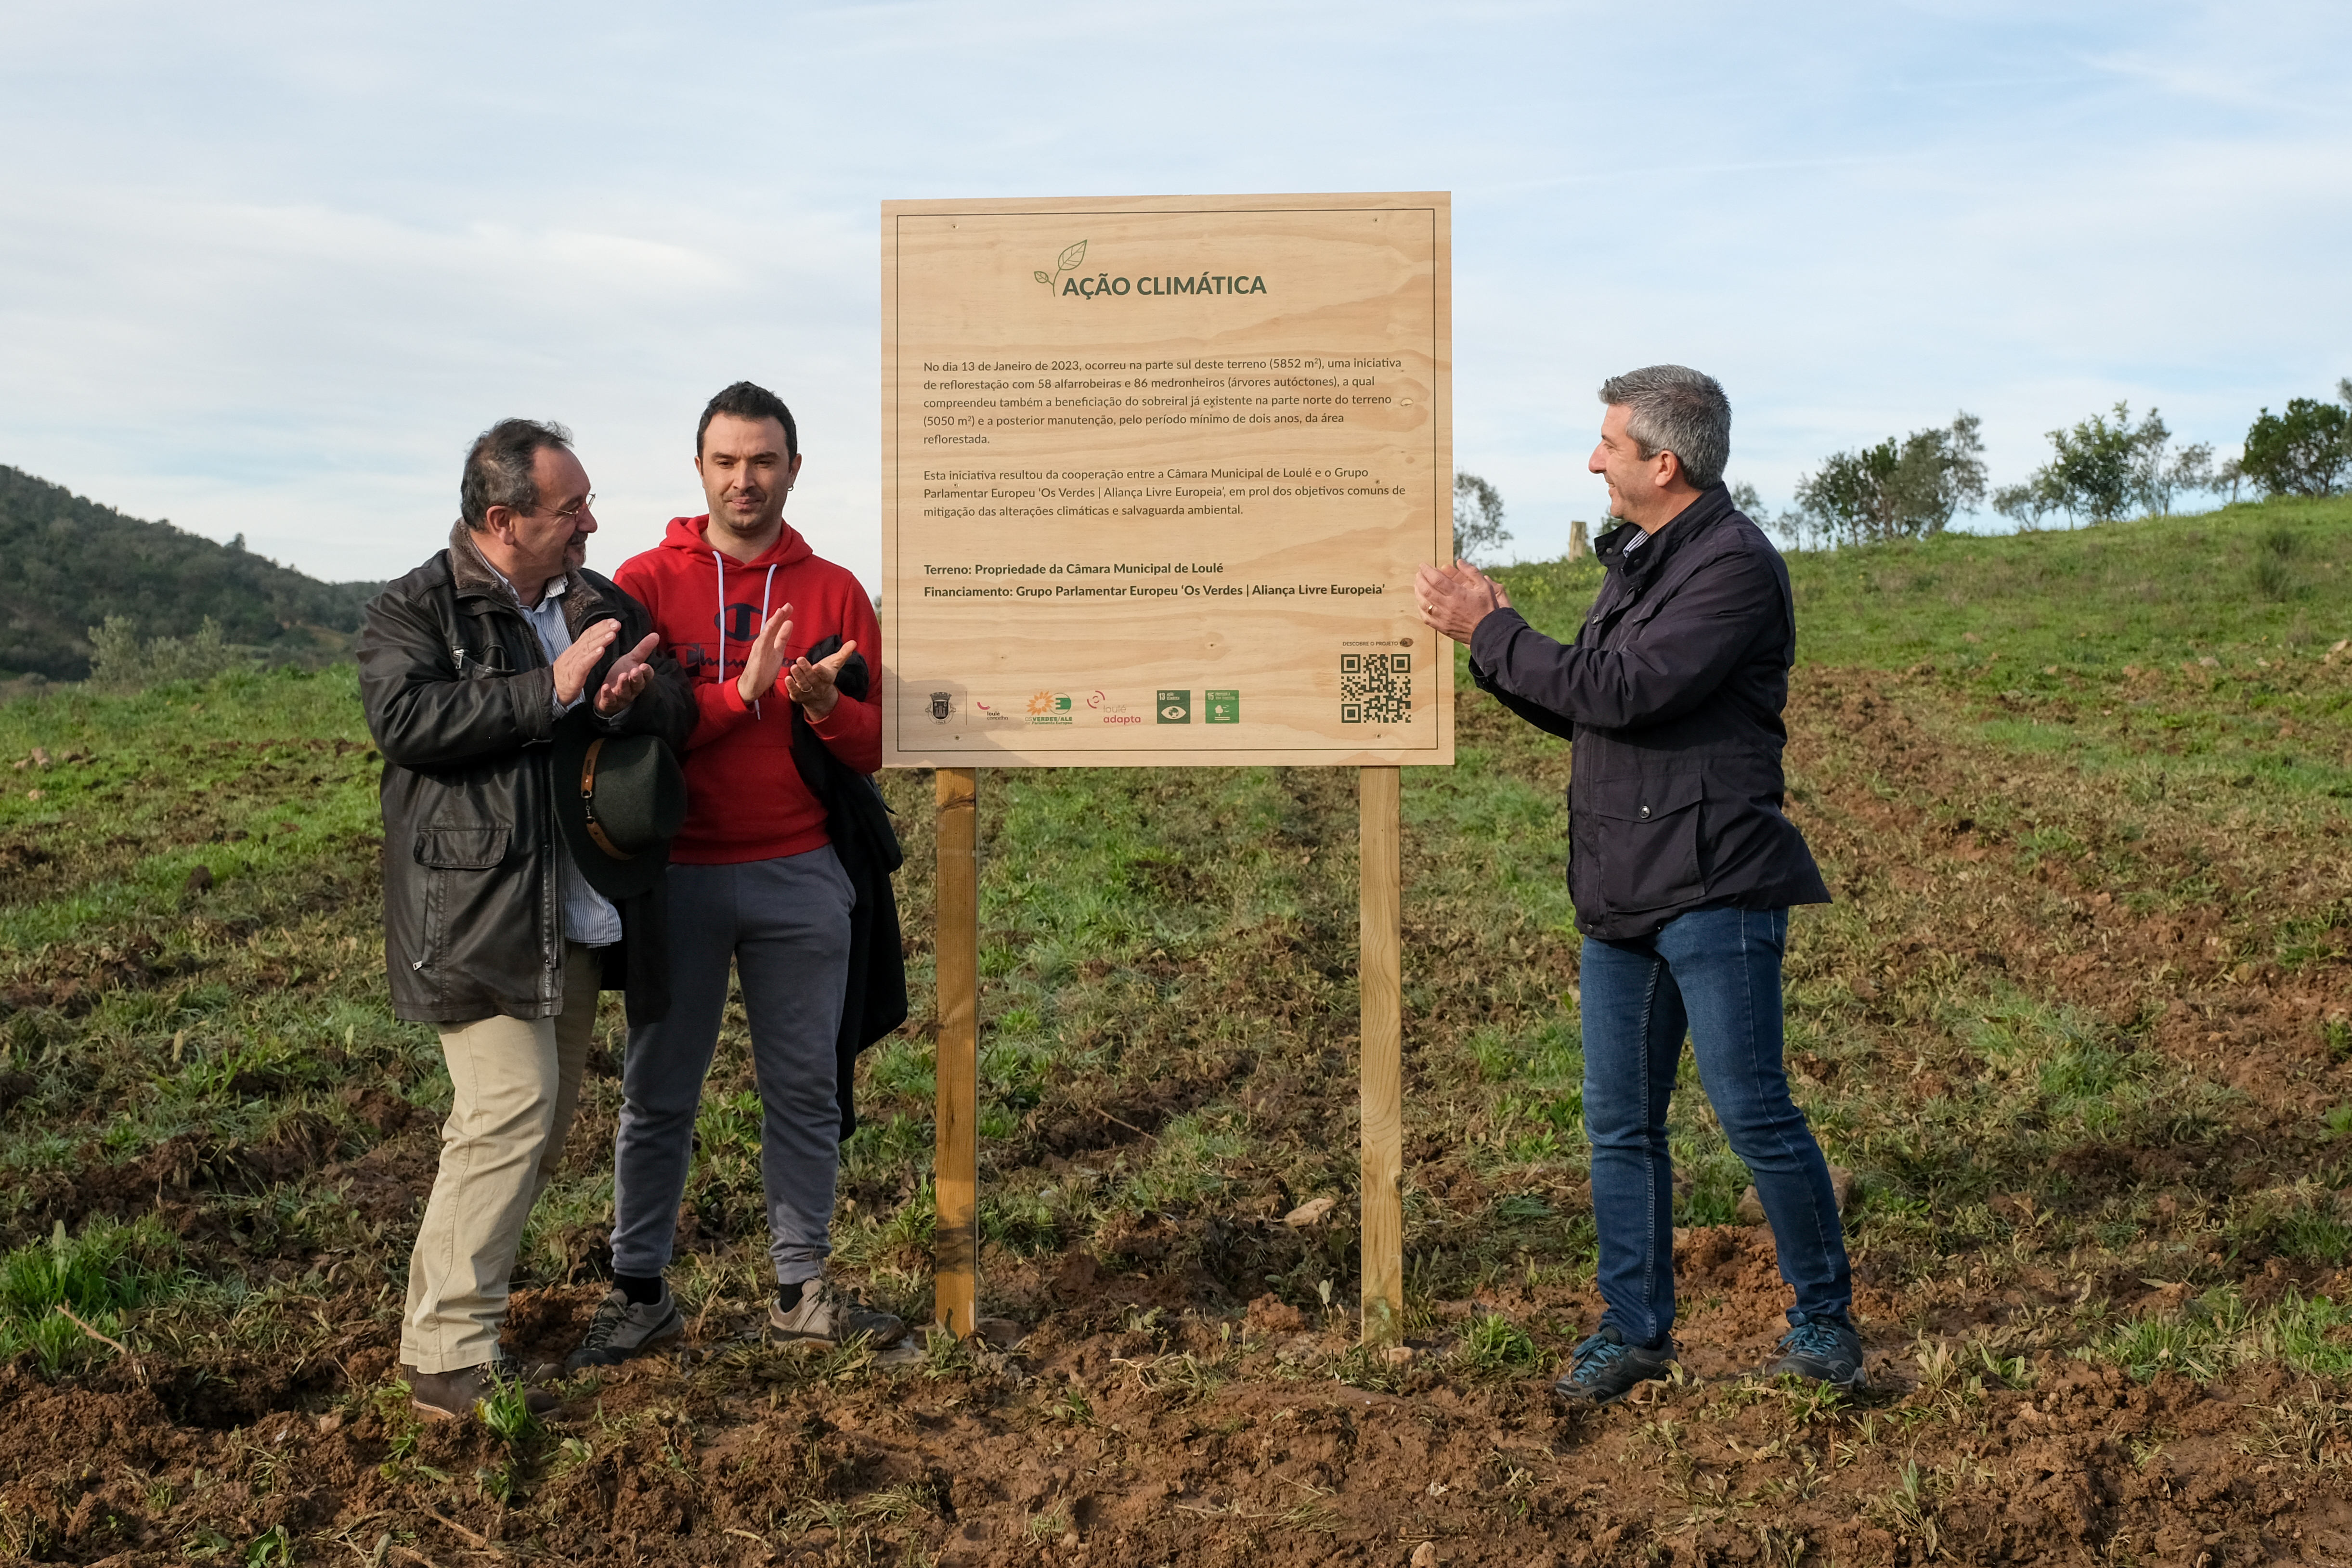 Ineews.eu: 'Planting action in Alte will minimize the ecological footprint of air travel'